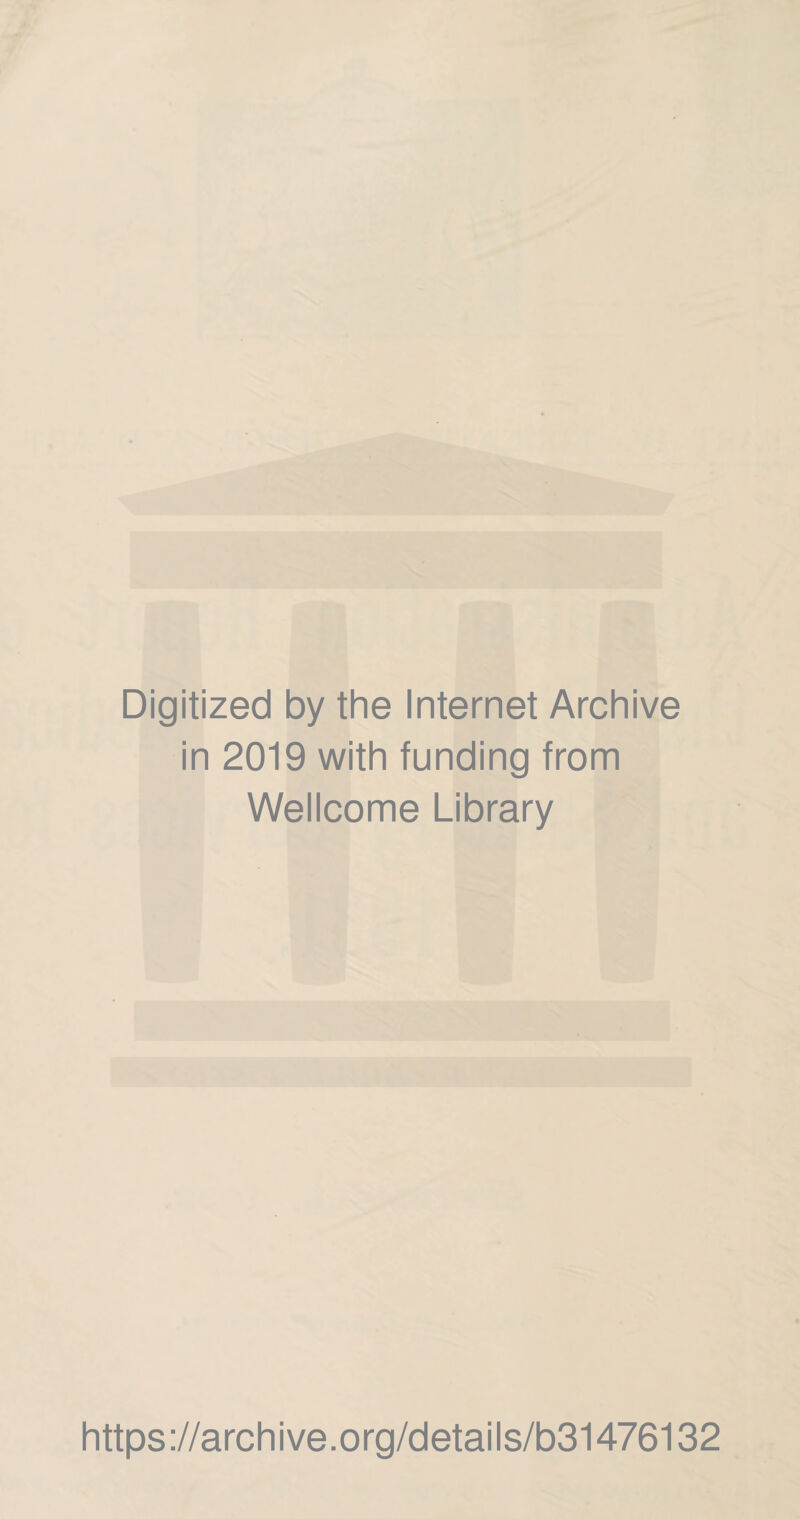 Digitized by the Internet Archive in 2019 with funding from Wellcome Library https://archive.org/details/b31476132